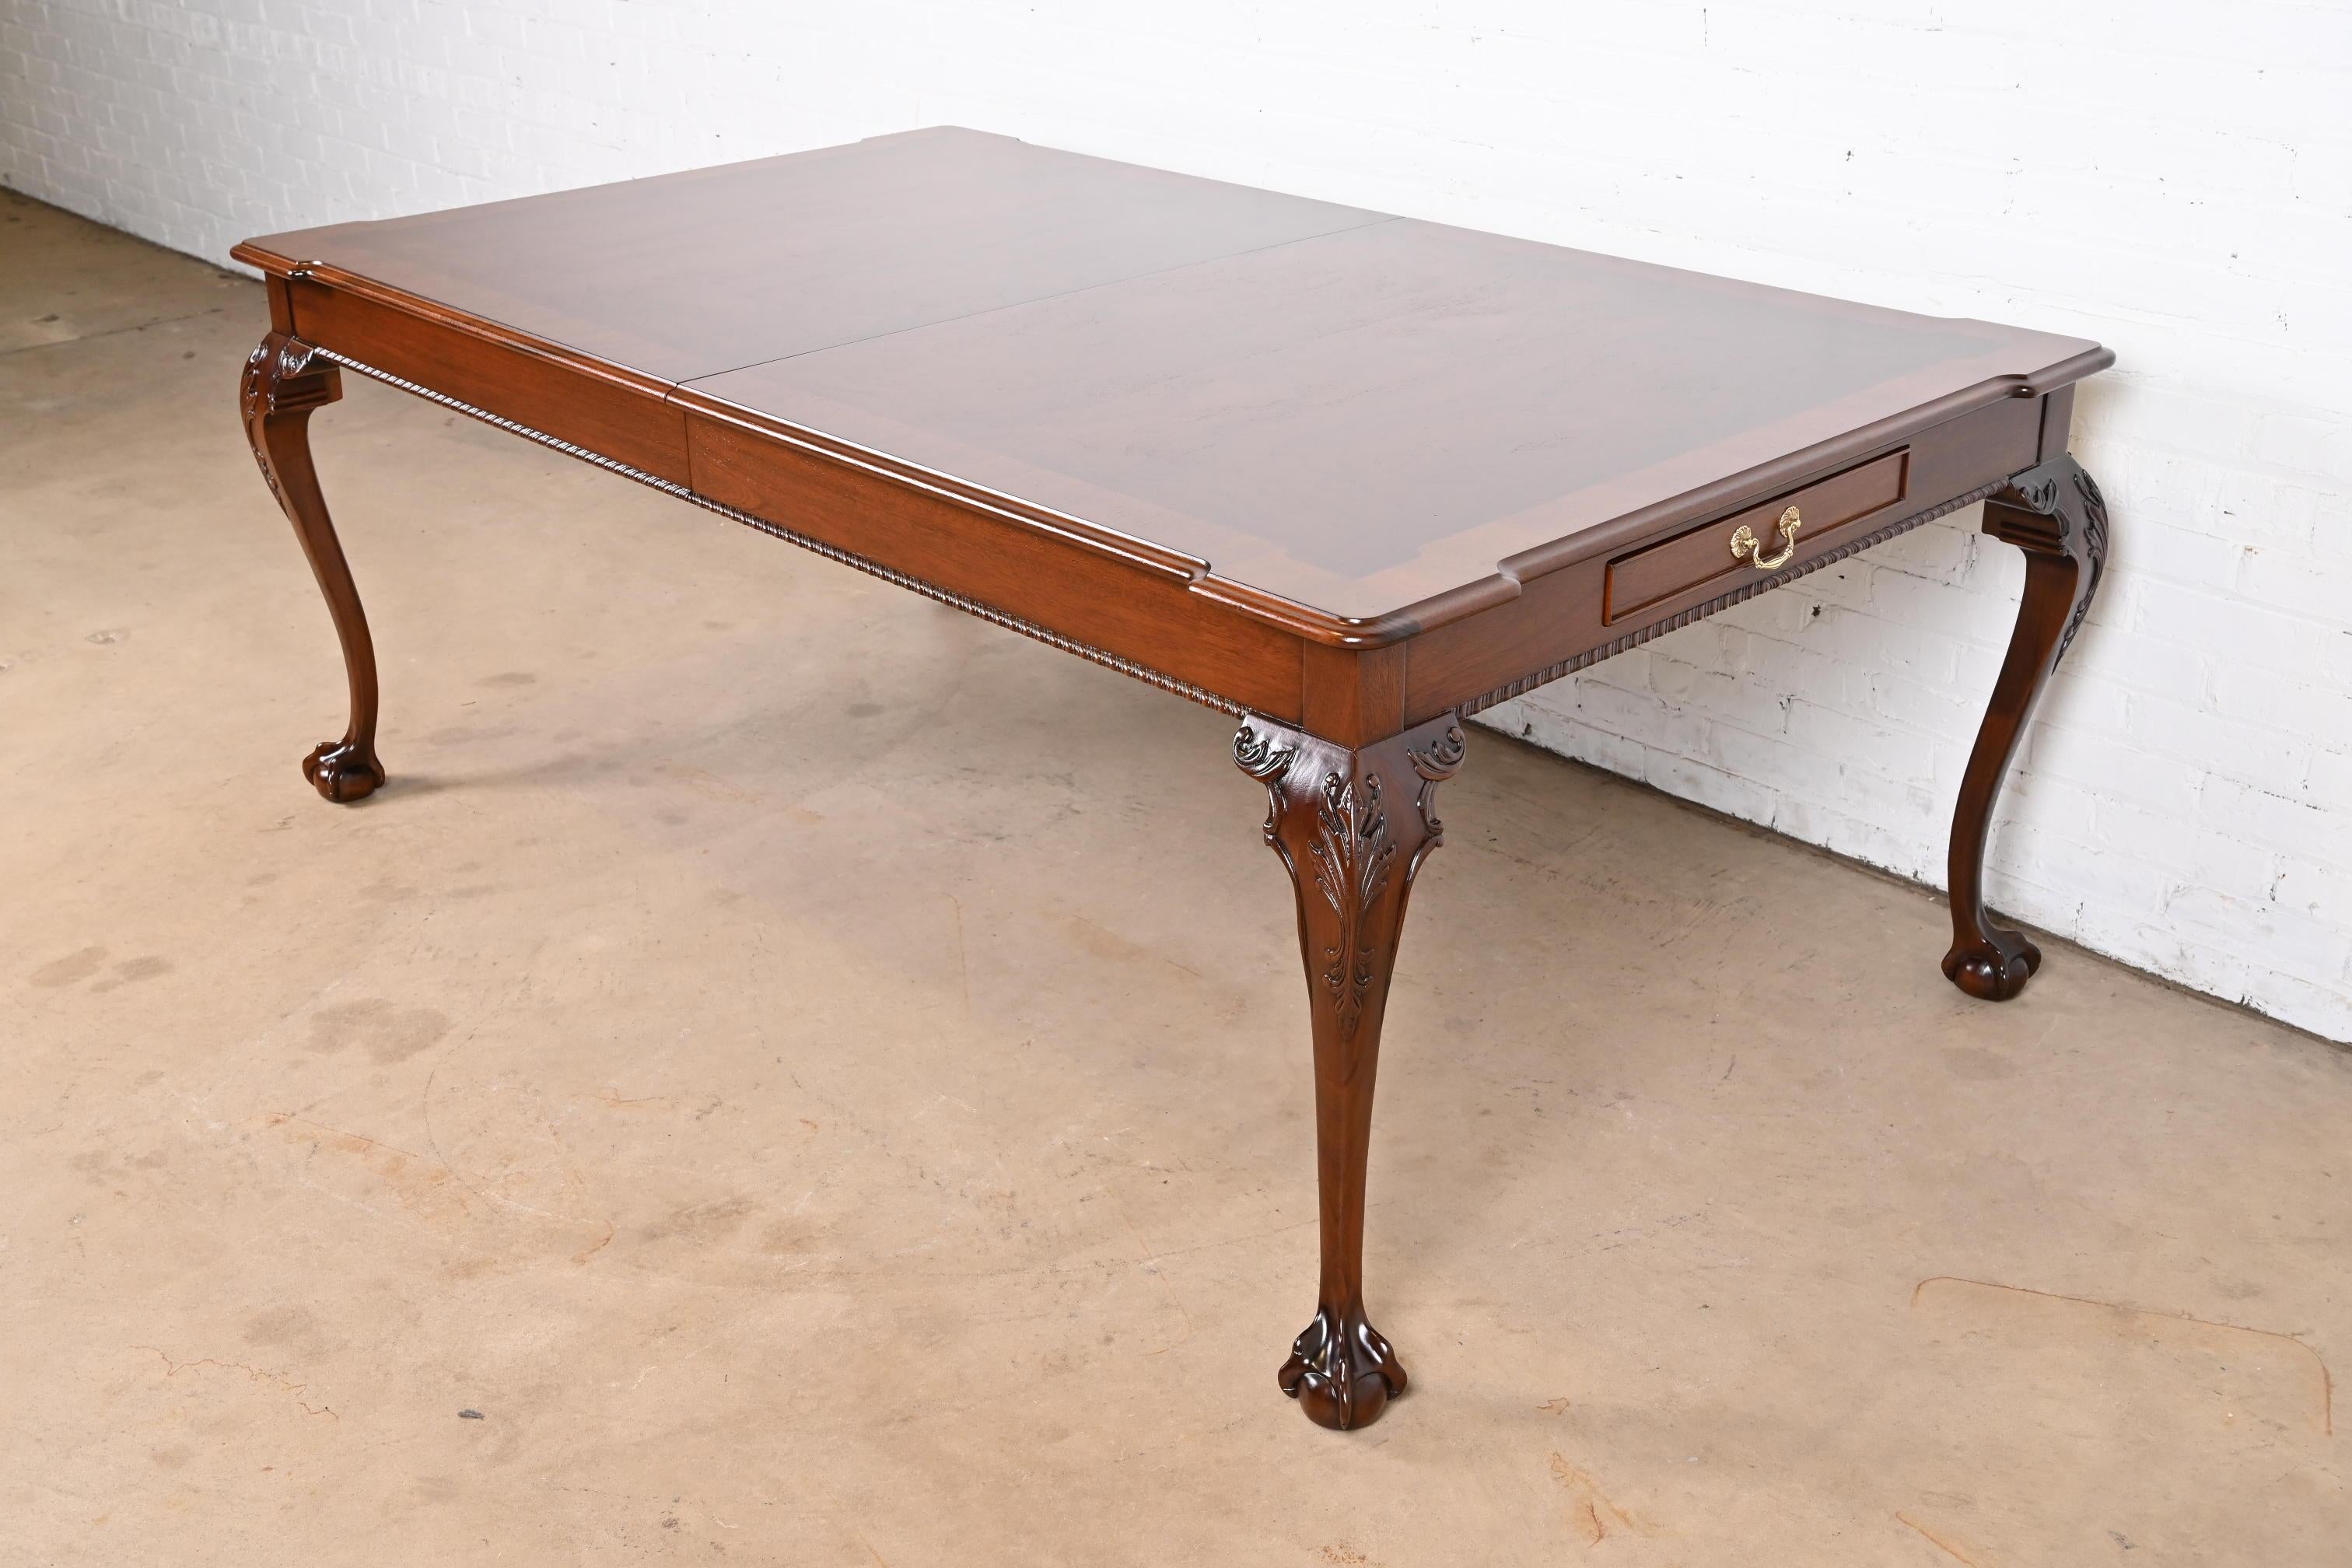 An exceptional Chippendale or Georgian style extension dining table

By Henredon

USA, Circa 1980s

Gorgeous book-matched burled walnut top, with mahogany banding, carved solid mahogany legs with ball and claw feet, and brass hardware on silverware